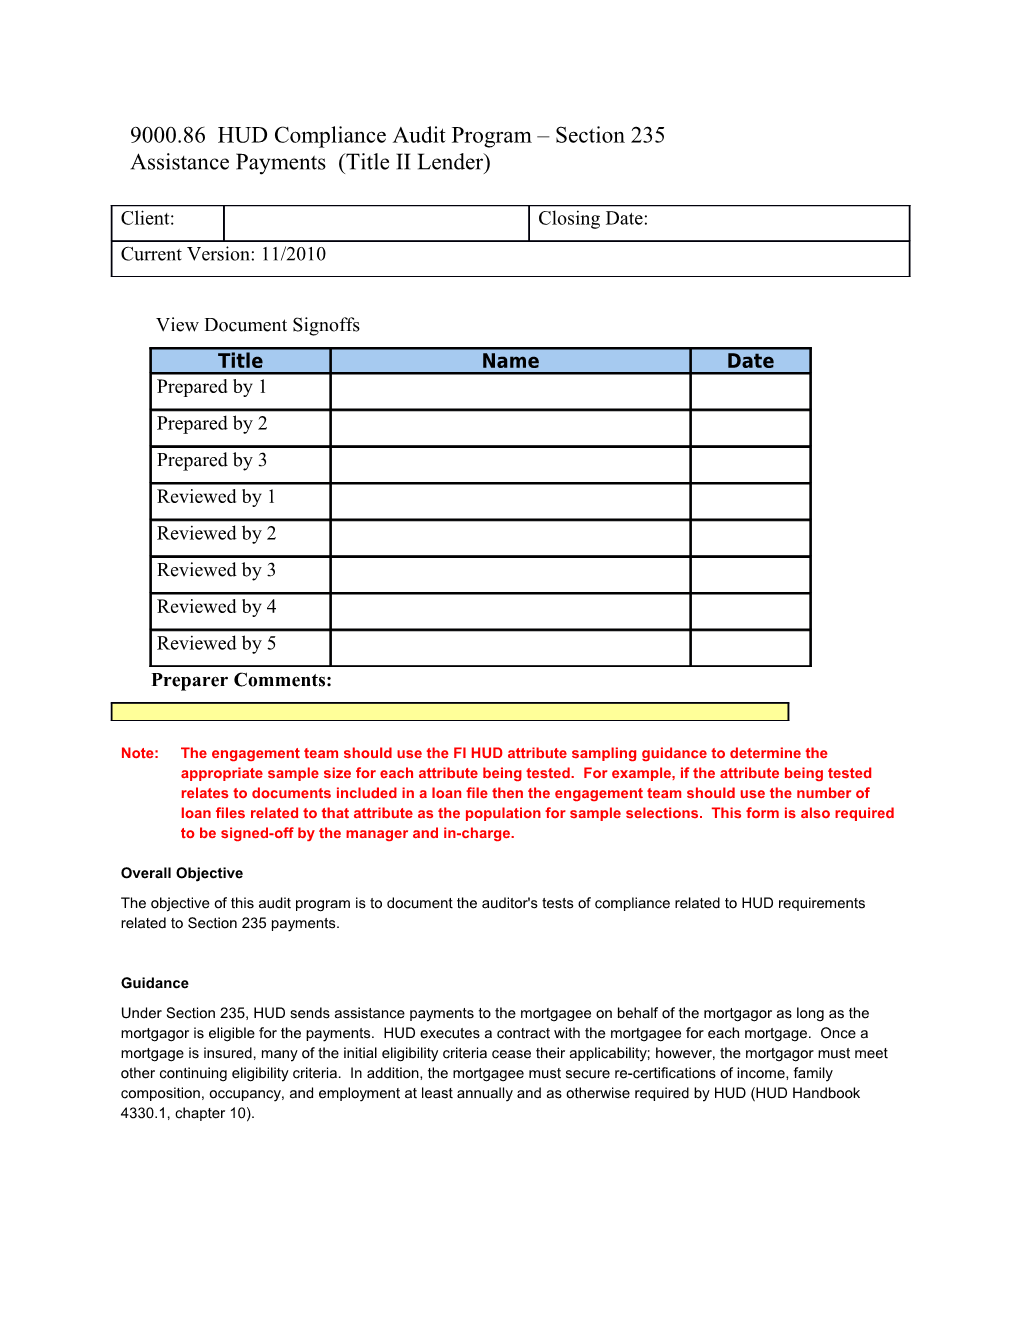 Compliance Finding Documentation